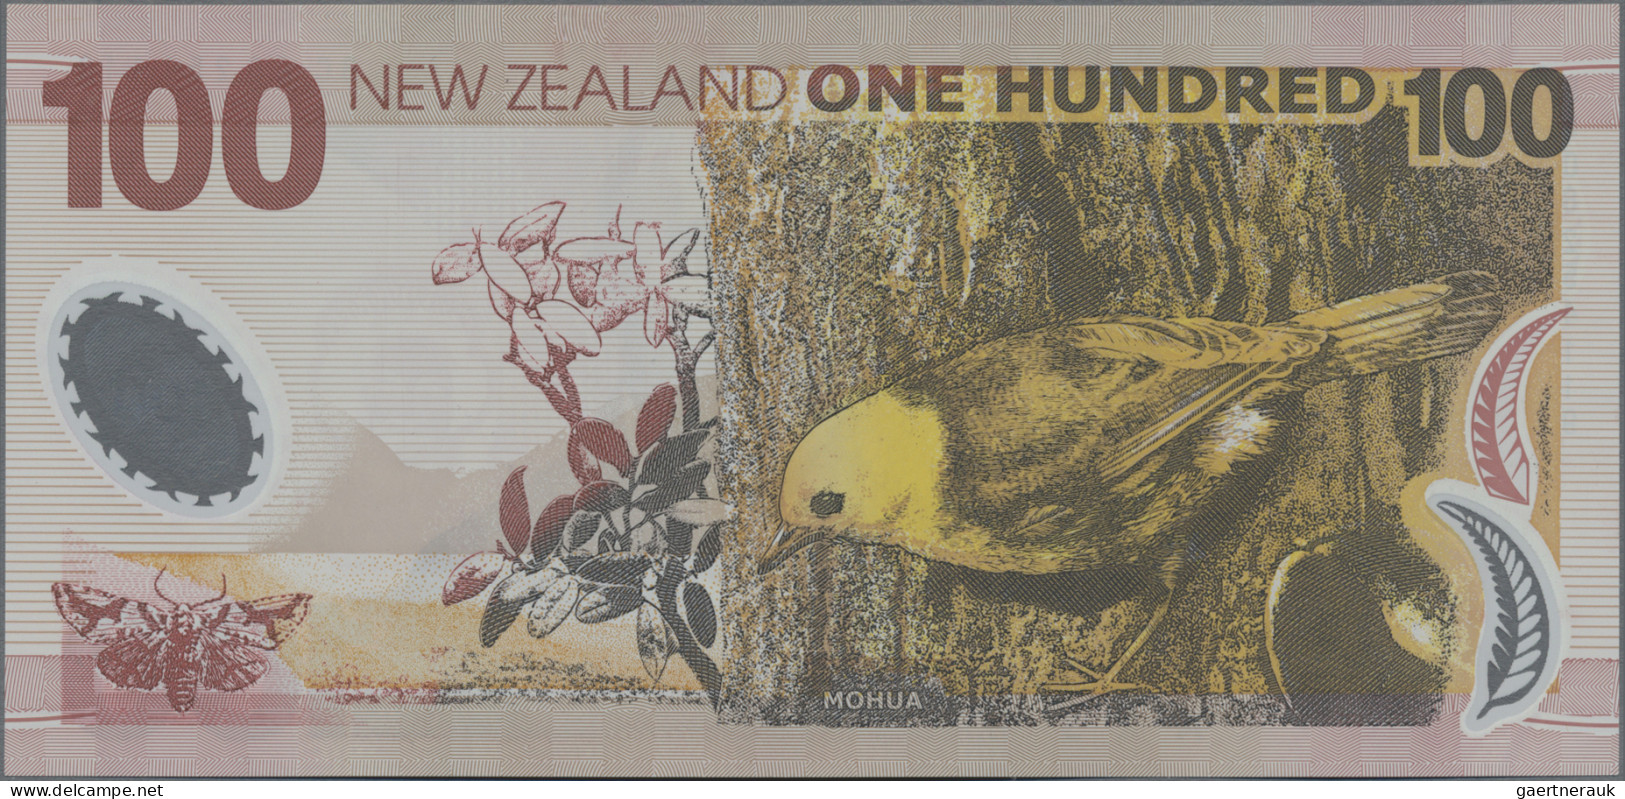 New Zealand: Reserve Bank Of New Zealand, Lot With 8 Banknotes, Series 1990-2006 - Neuseeland